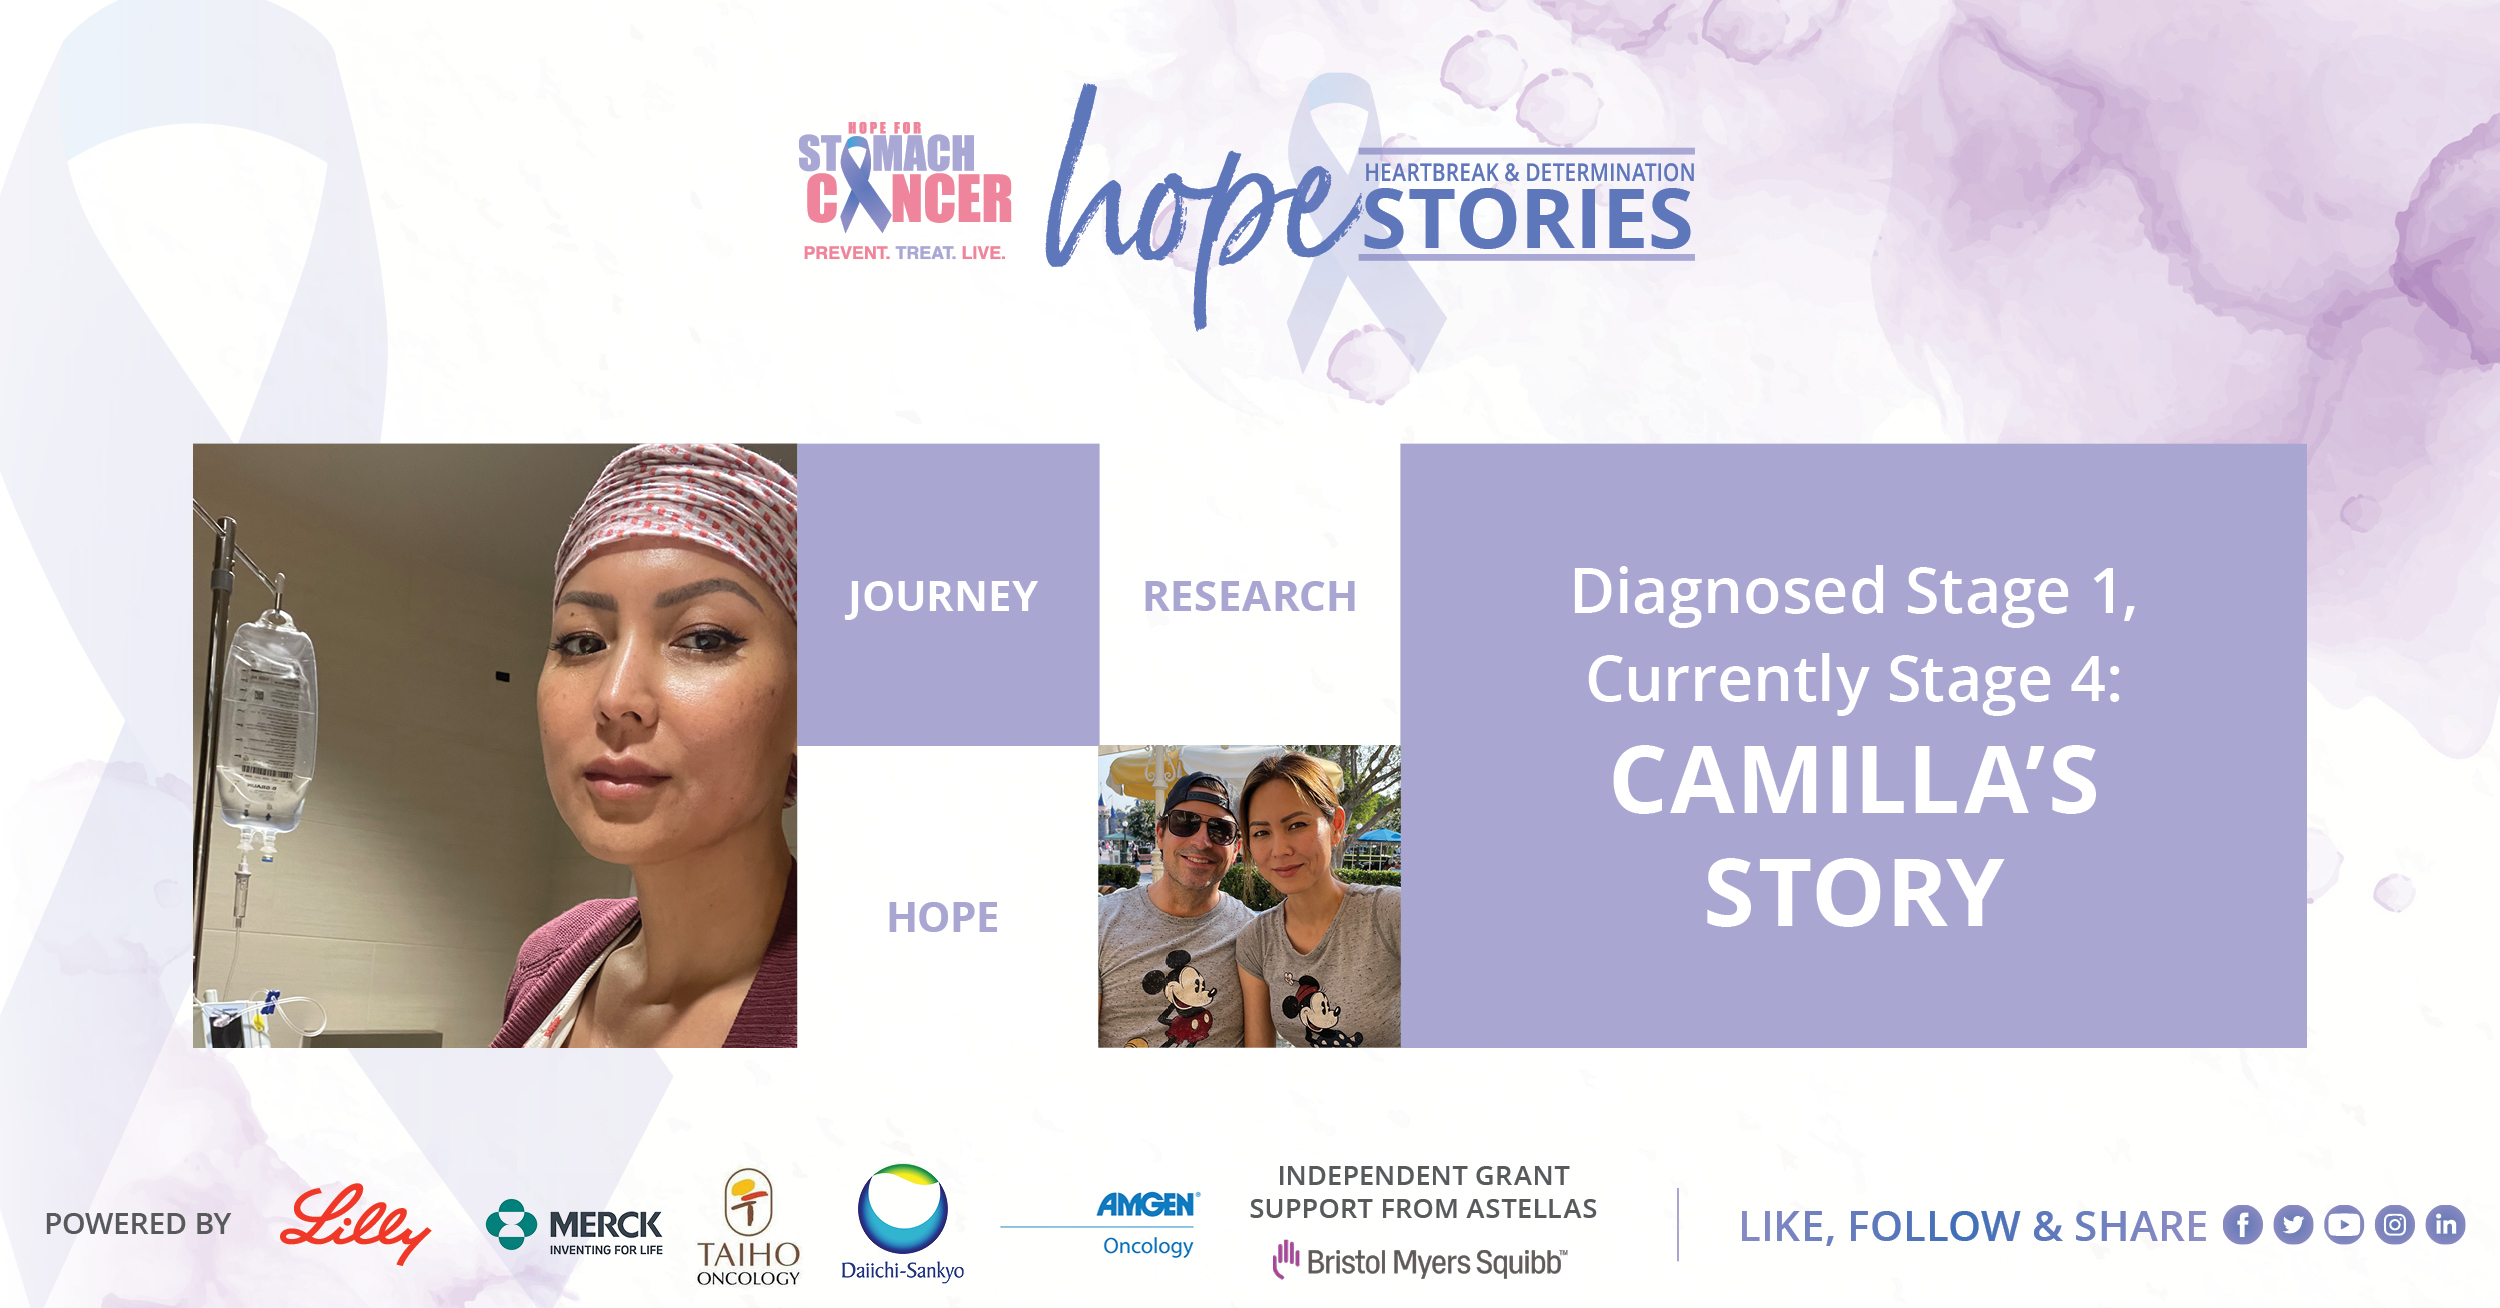 From Stage 1b to Stage 4: Camilla Row's Story